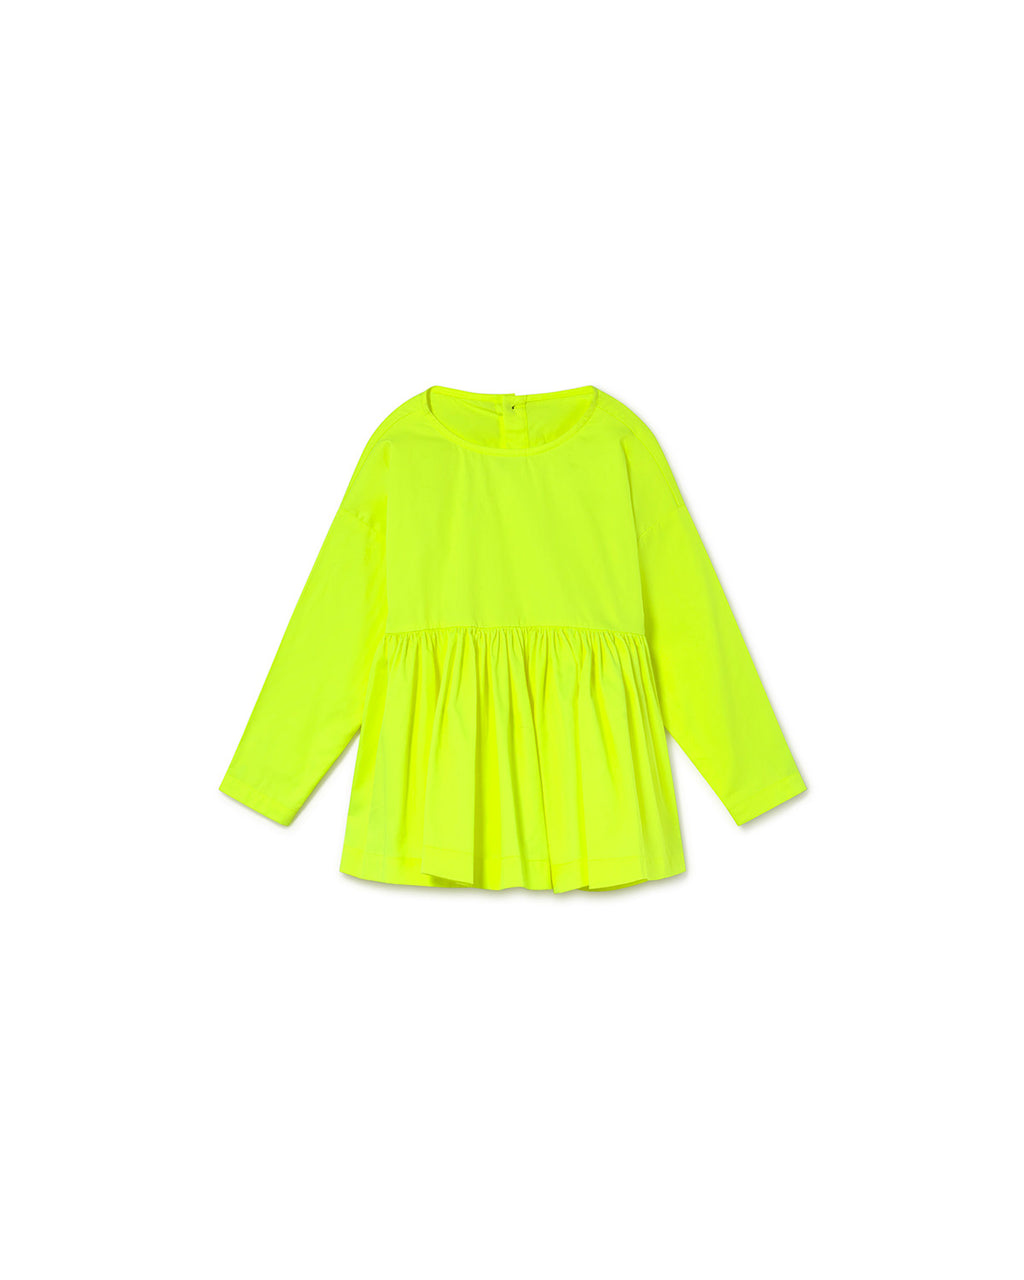 Little Creative Factory Cubic Top - Yellow Neon